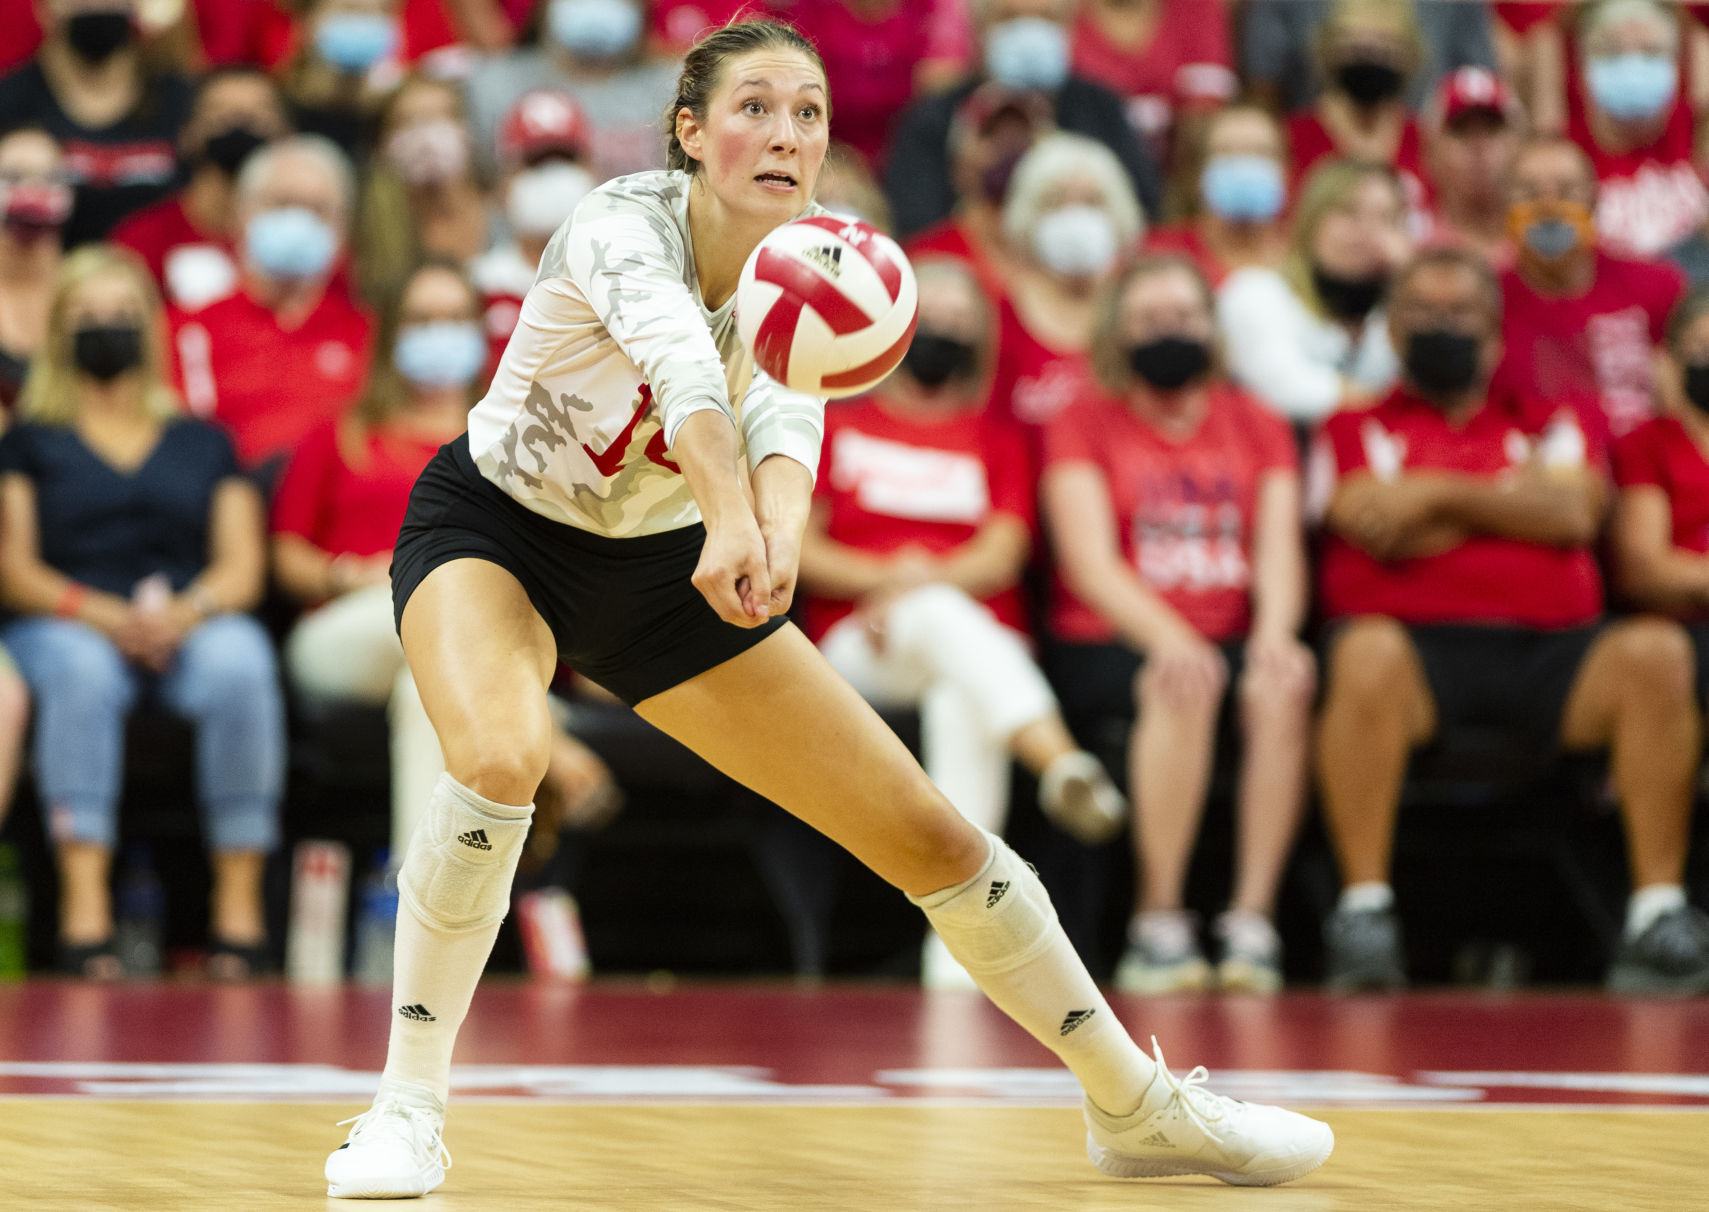 Husker volleyball notes Madi Kubiks big responsibility, TV ratings and incoming freshmen enrolling early